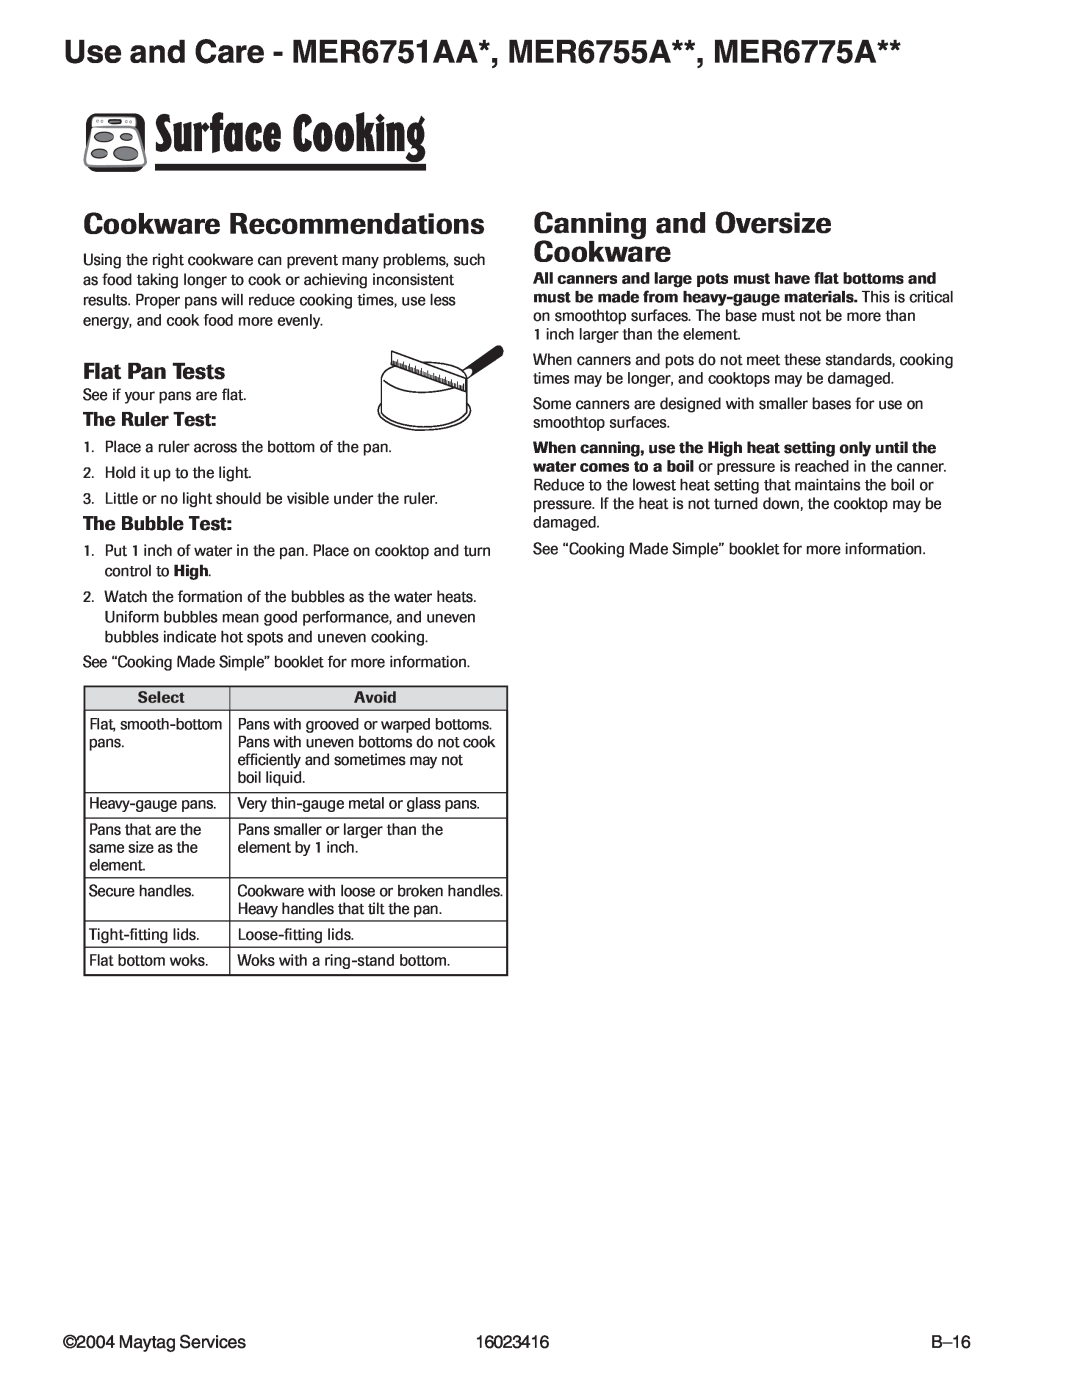 Maytag MER6751AAB/Q/S/W manual Cookware Recommendations, Canning and Oversize Cookware, Flat Pan Tests, The Ruler Test 